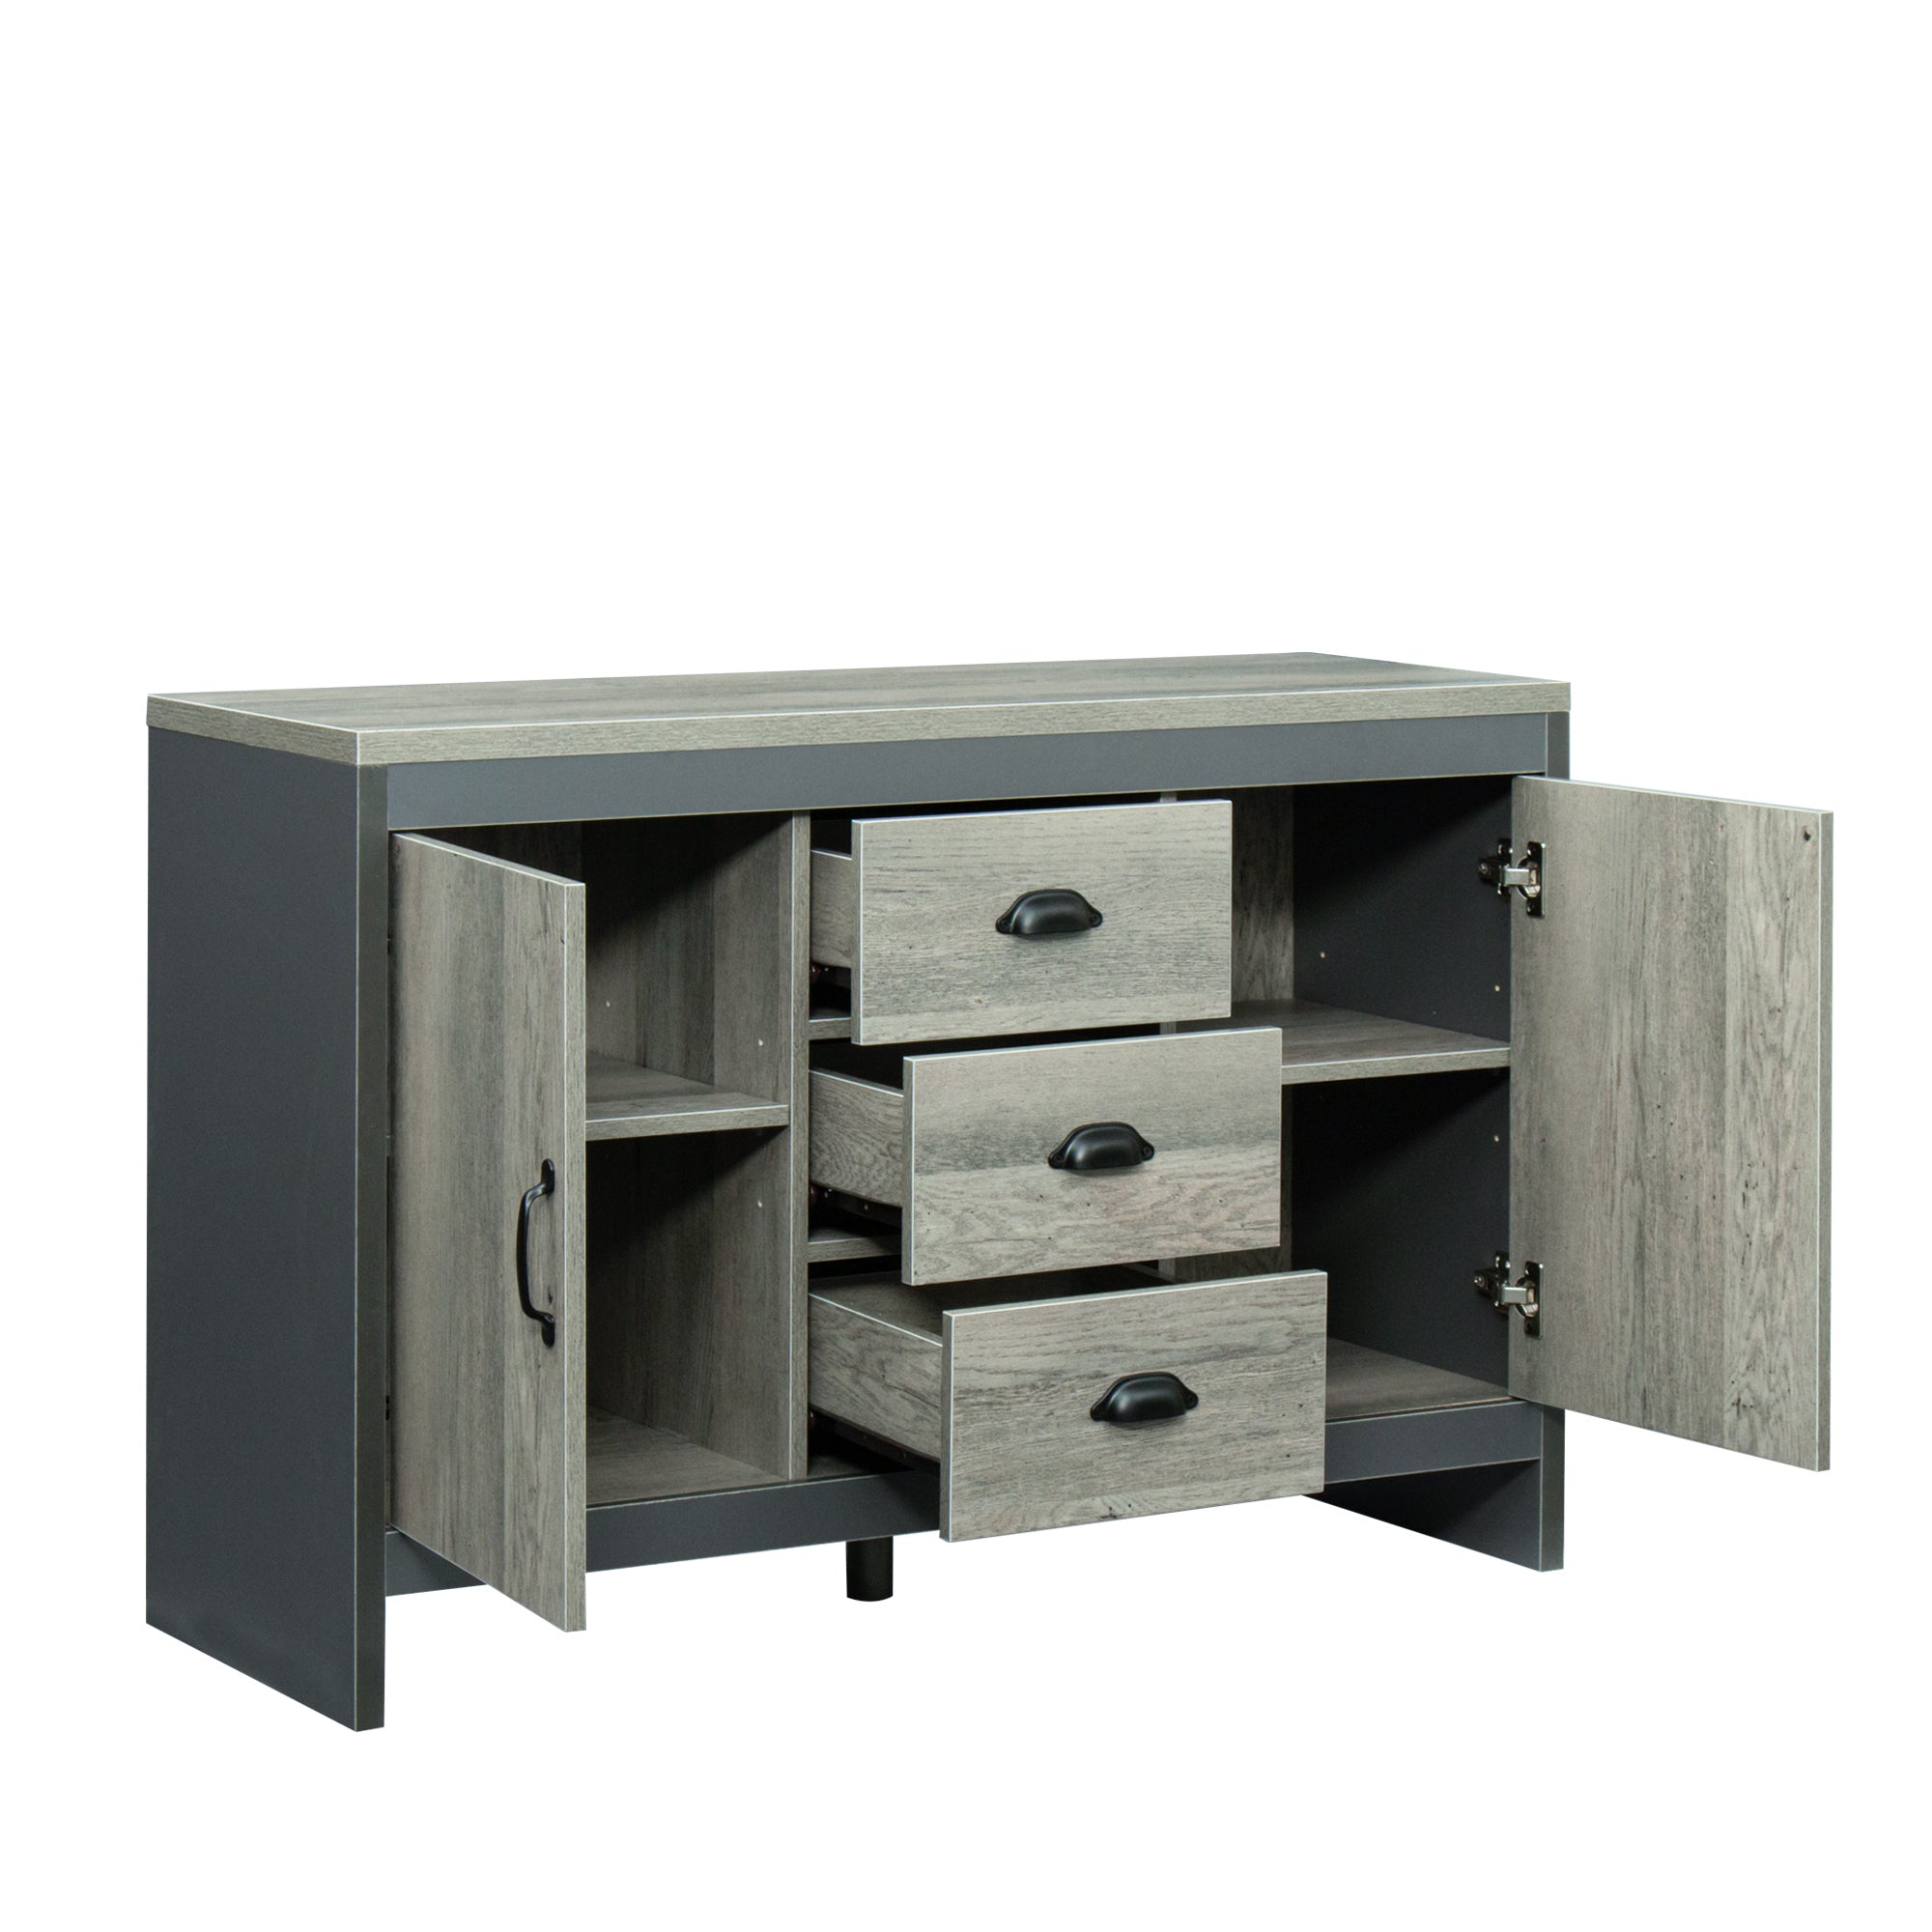 Double Door side Cabinet with Drawers